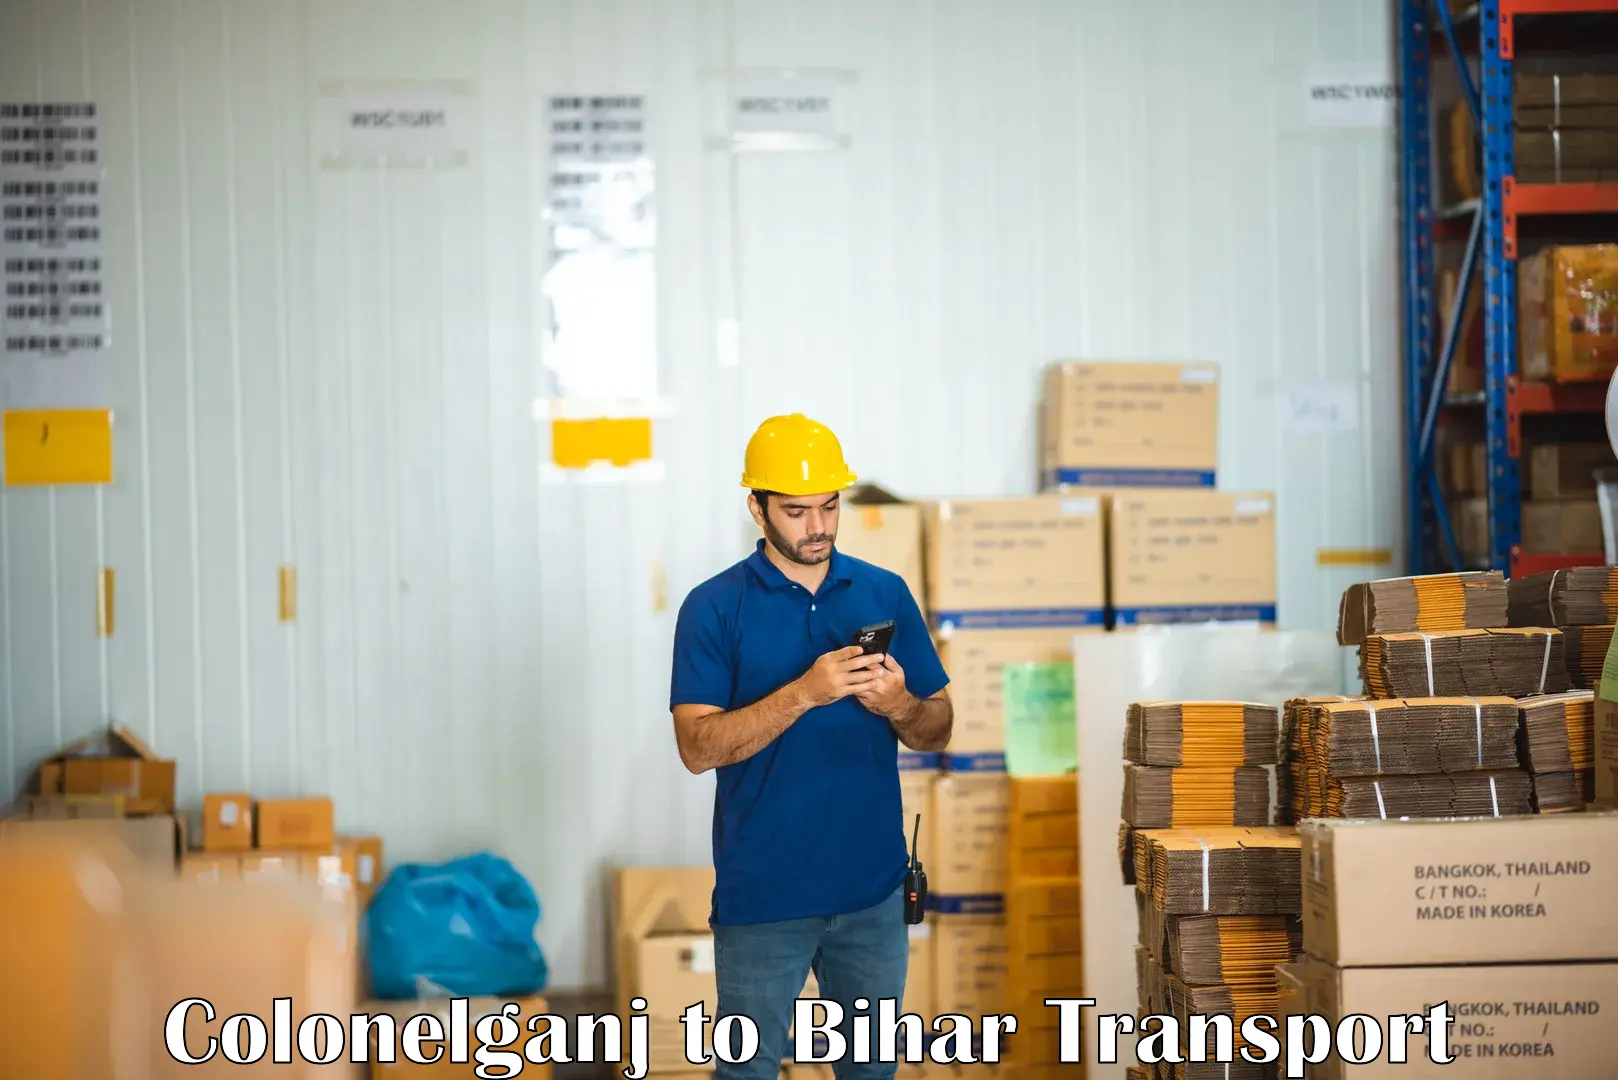 Air freight transport services Colonelganj to Bhorey